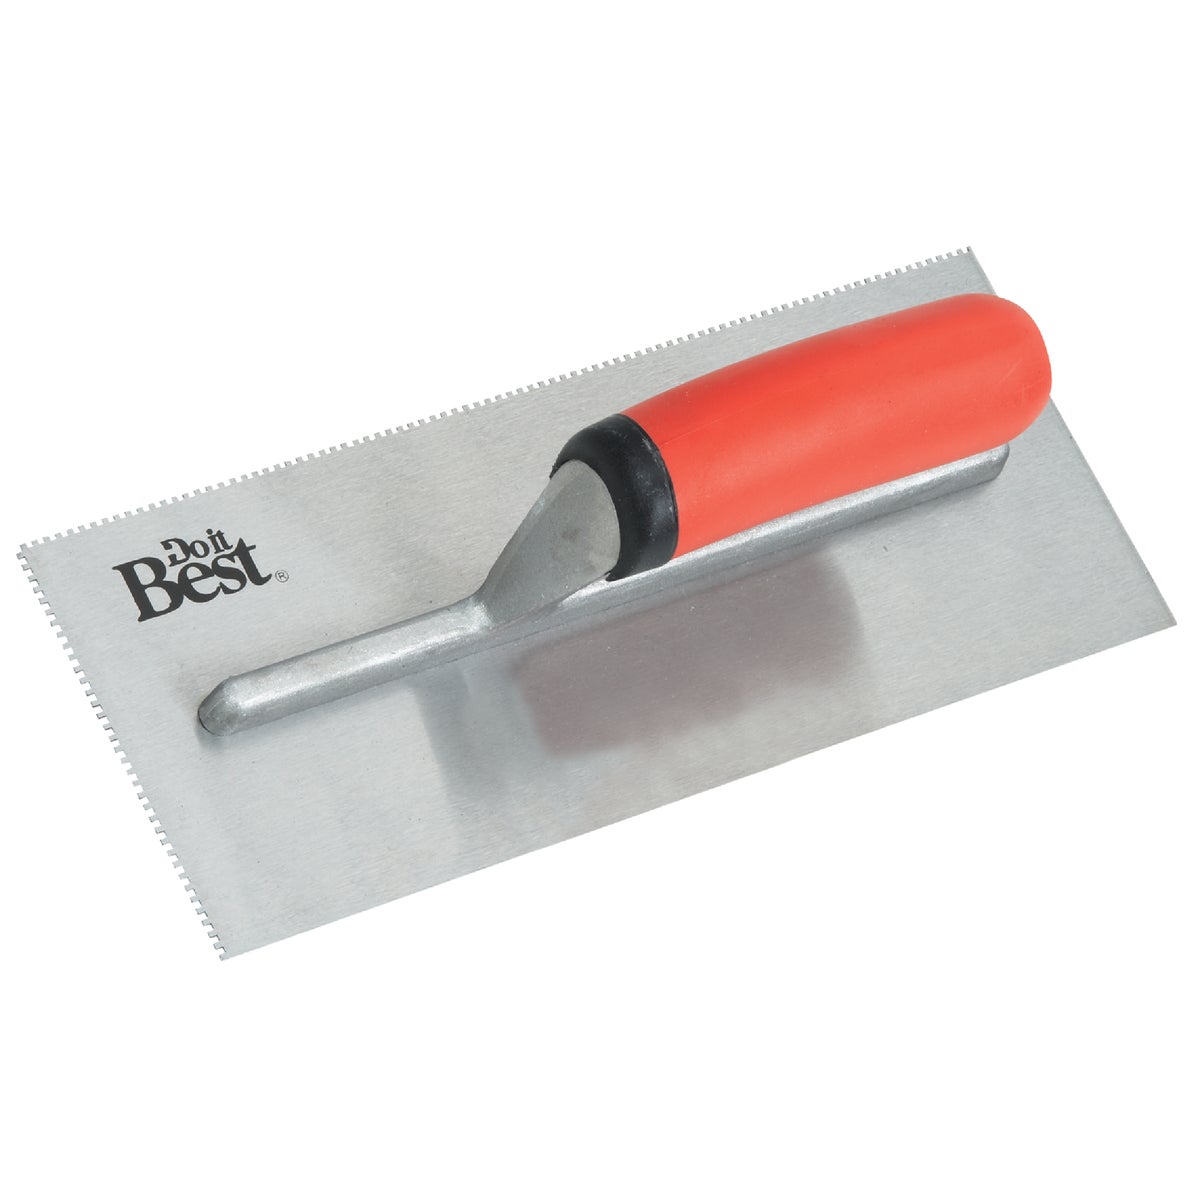 Item 311585, These notched trowels are constructed from high-quality tempered steel with